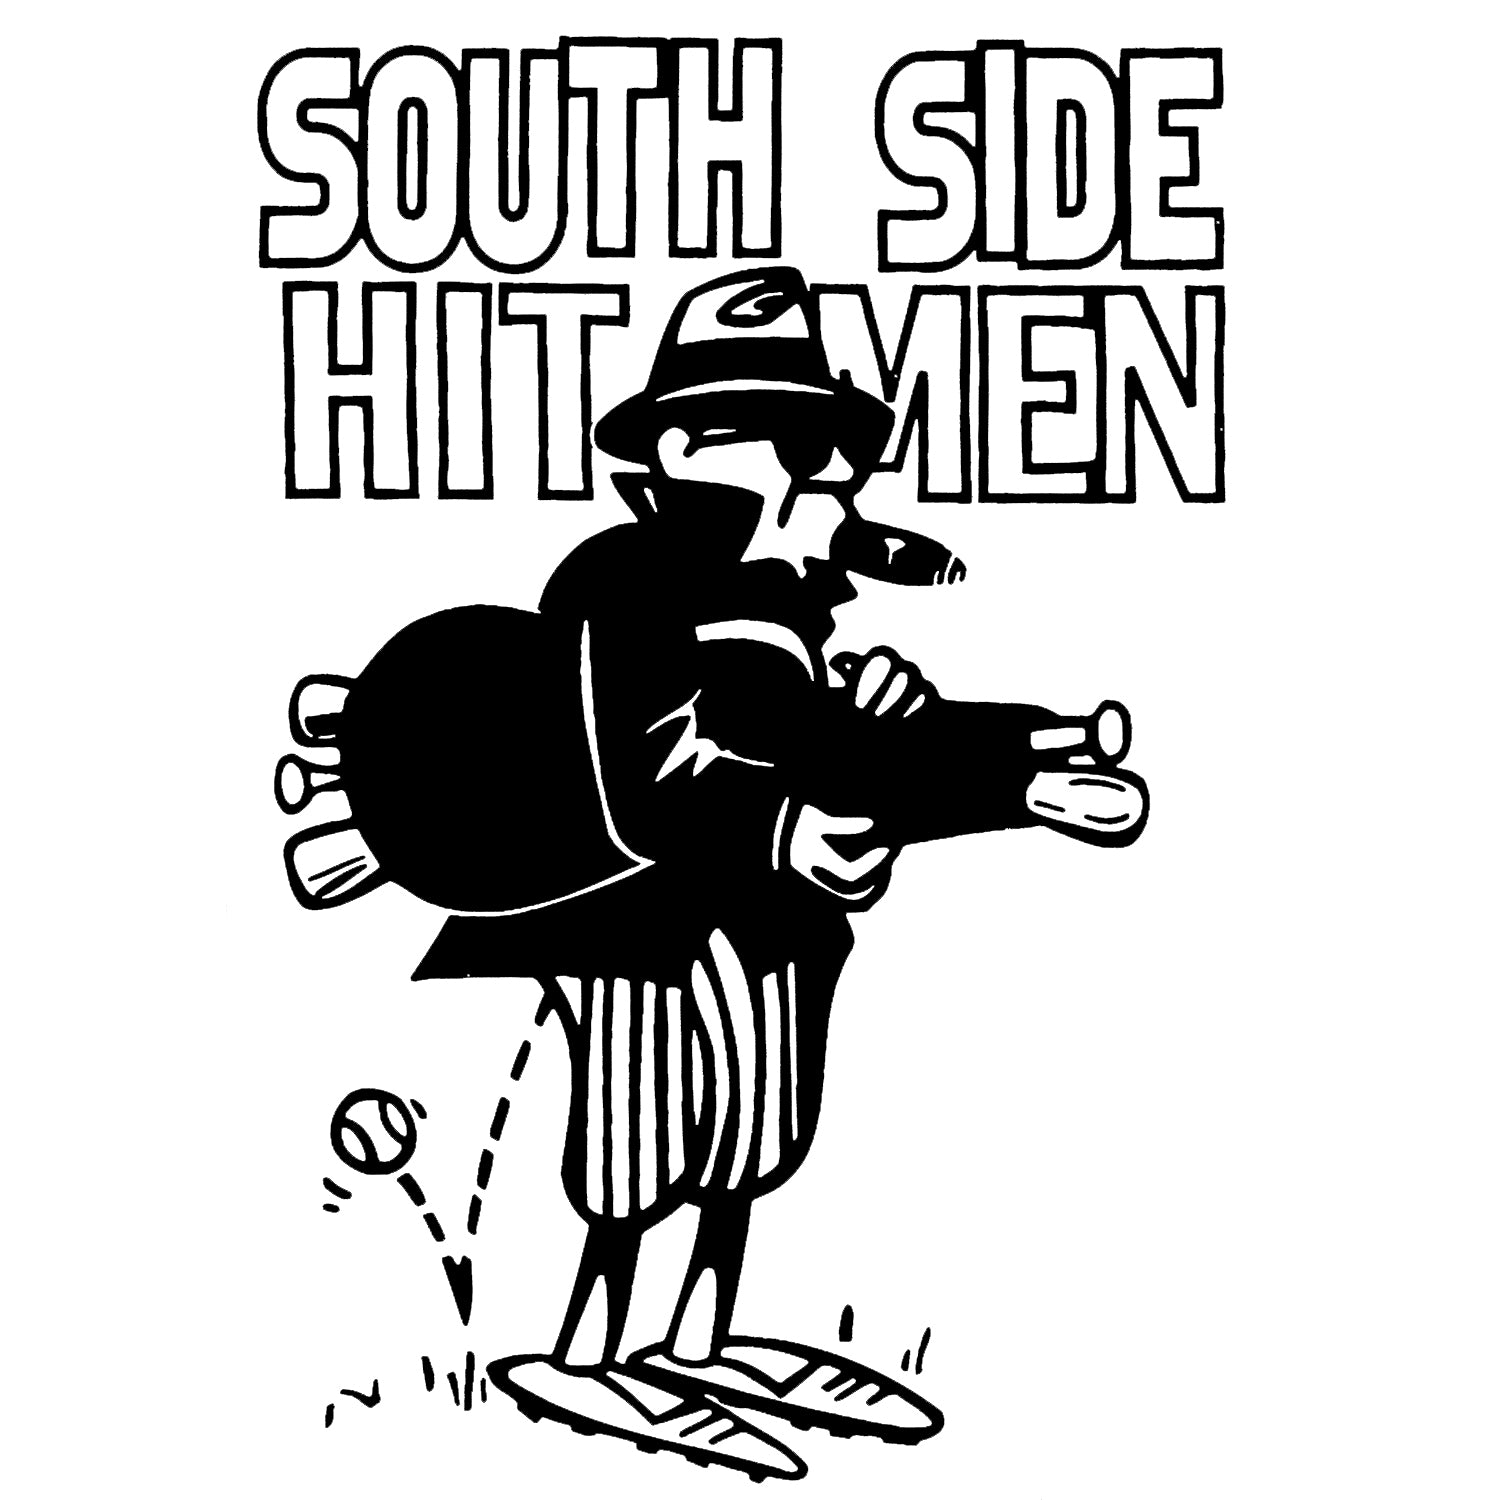 The South Side Ballpark - Chicago White Sox - T-Shirt